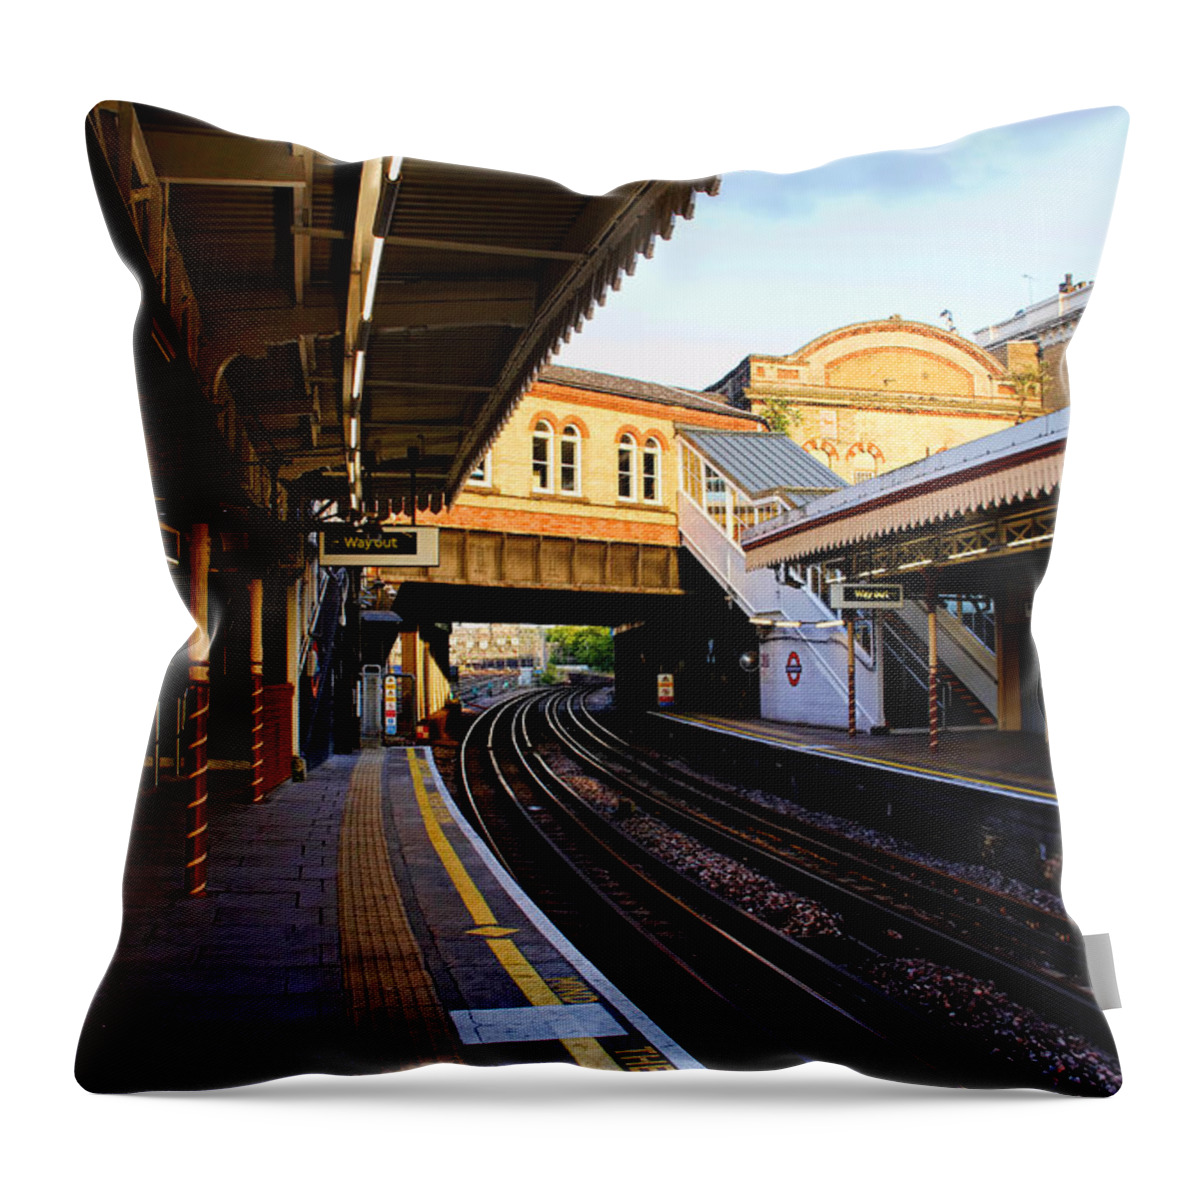 #london Throw Pillow featuring the photograph Westbourne Park Tube Station London by Nicky Jameson